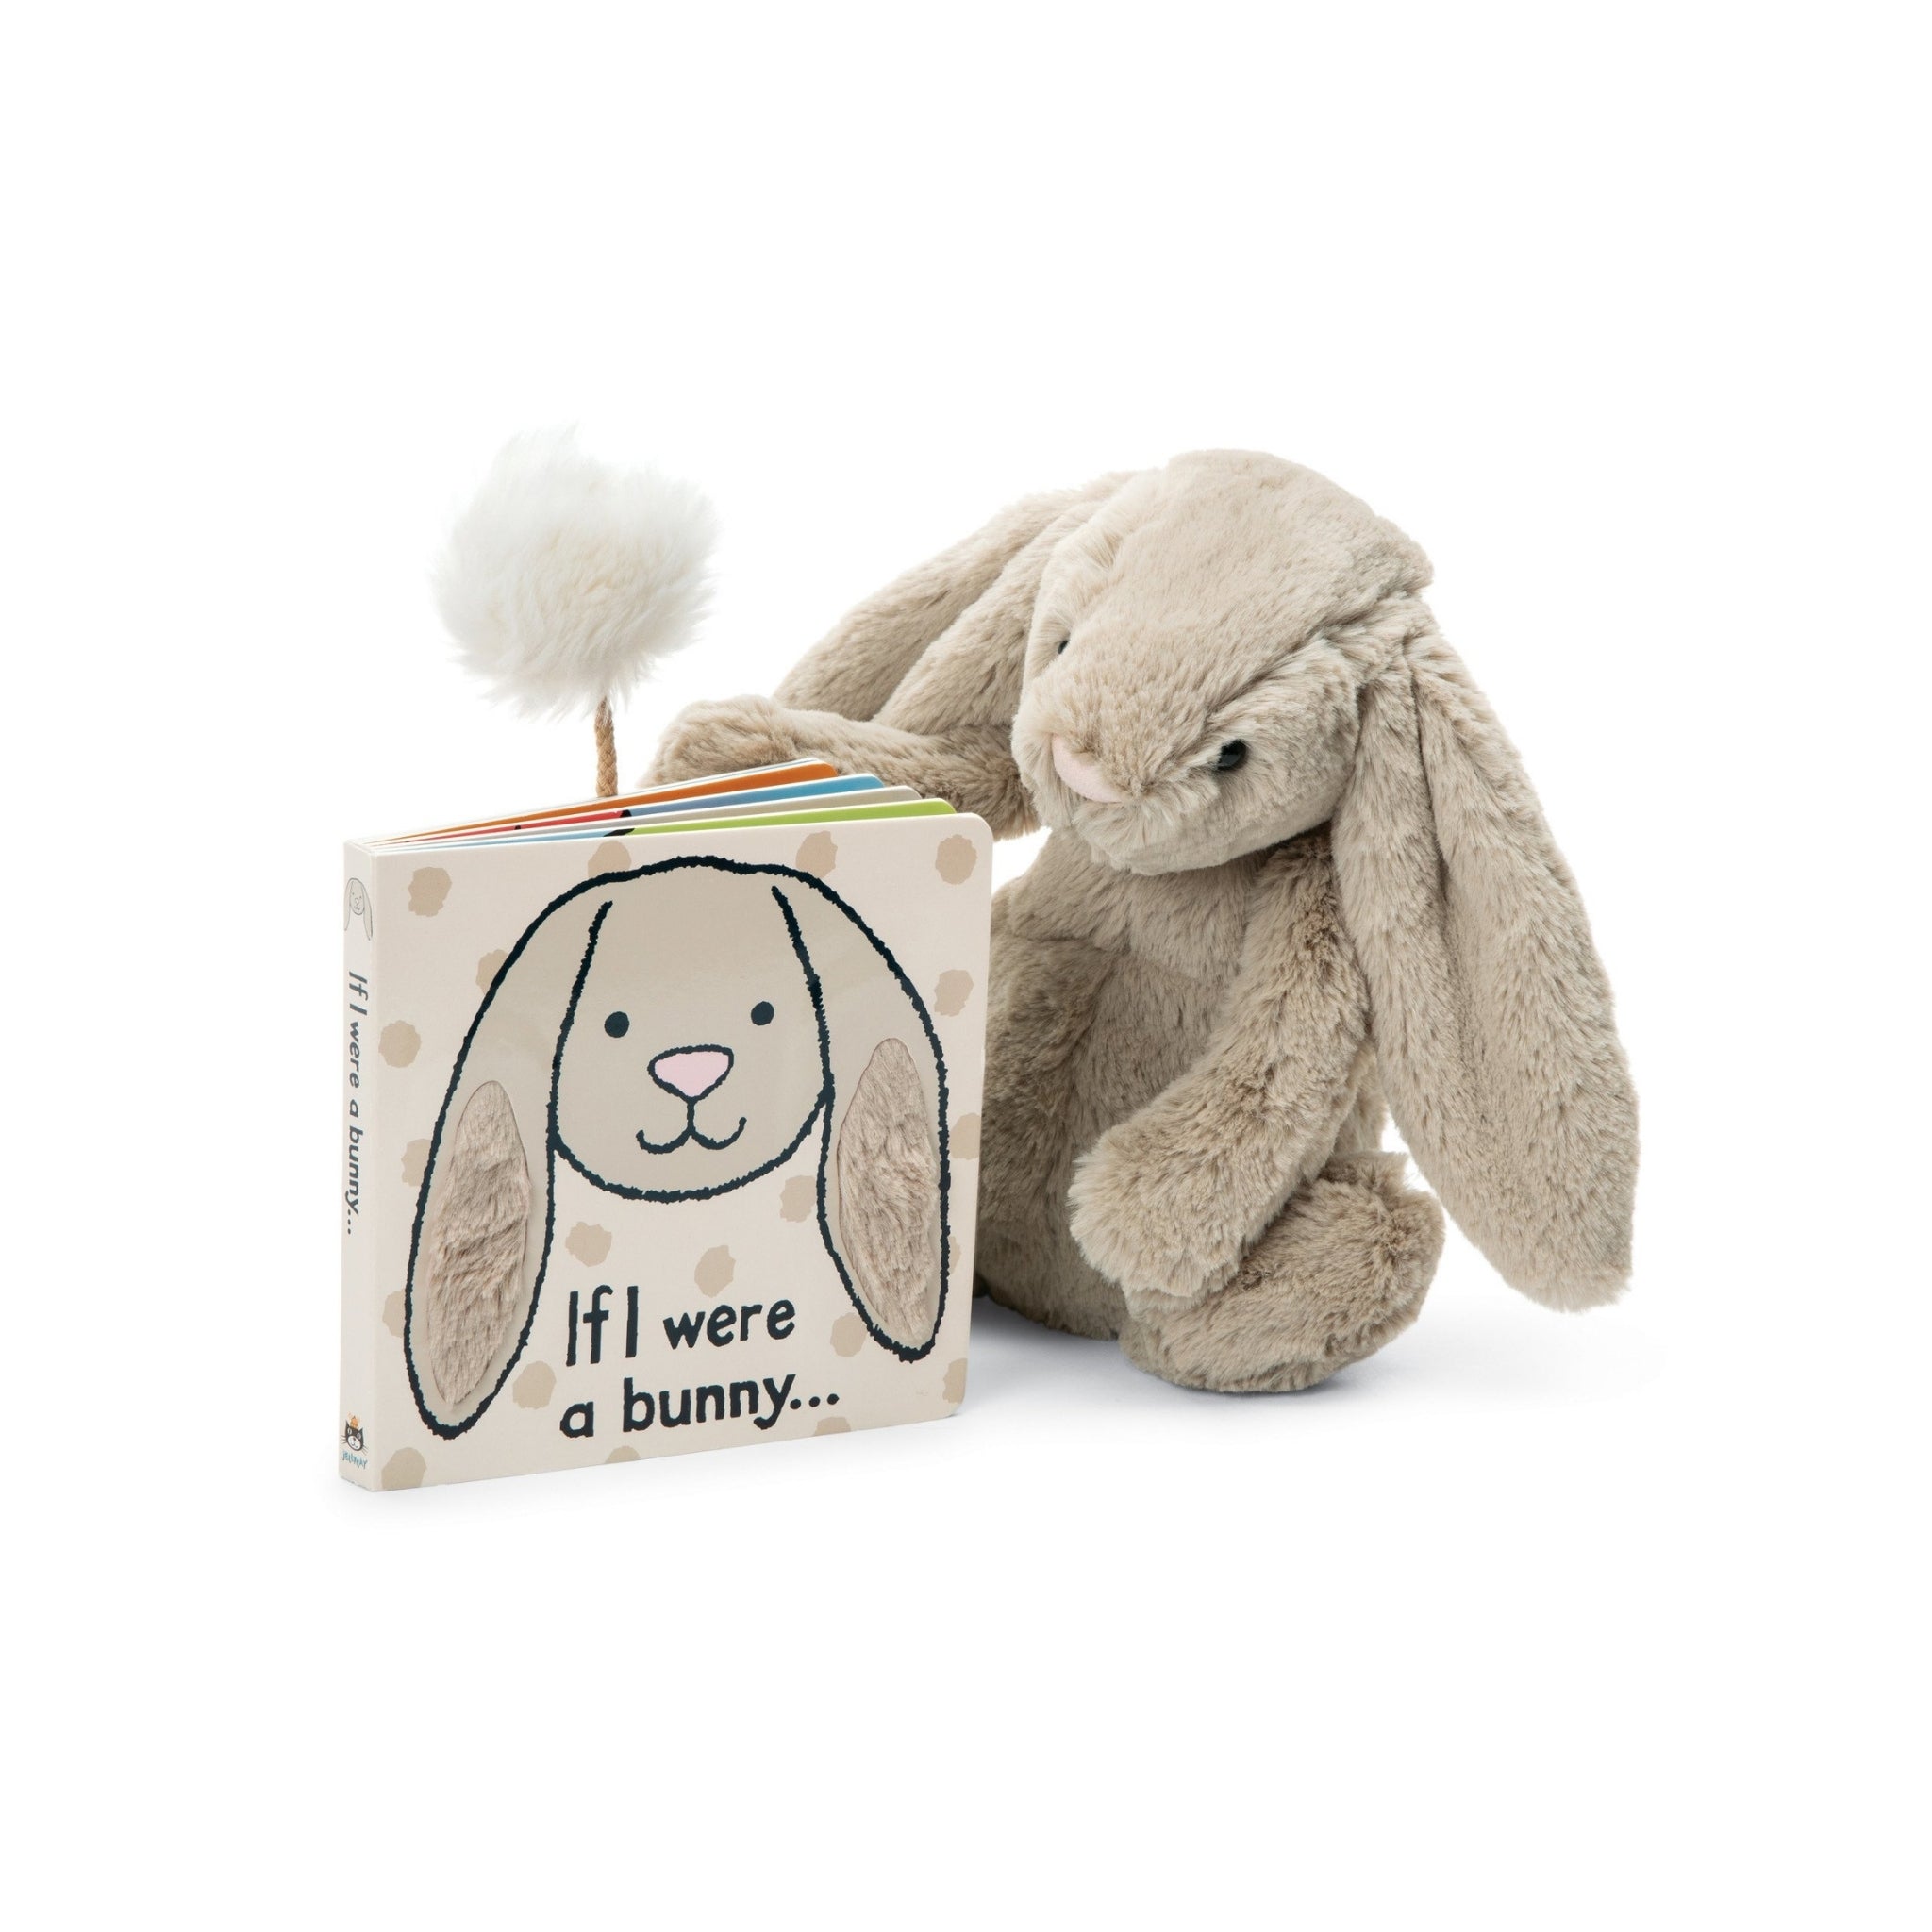 If I Were A Bunny Book And Bashful Bunny Set